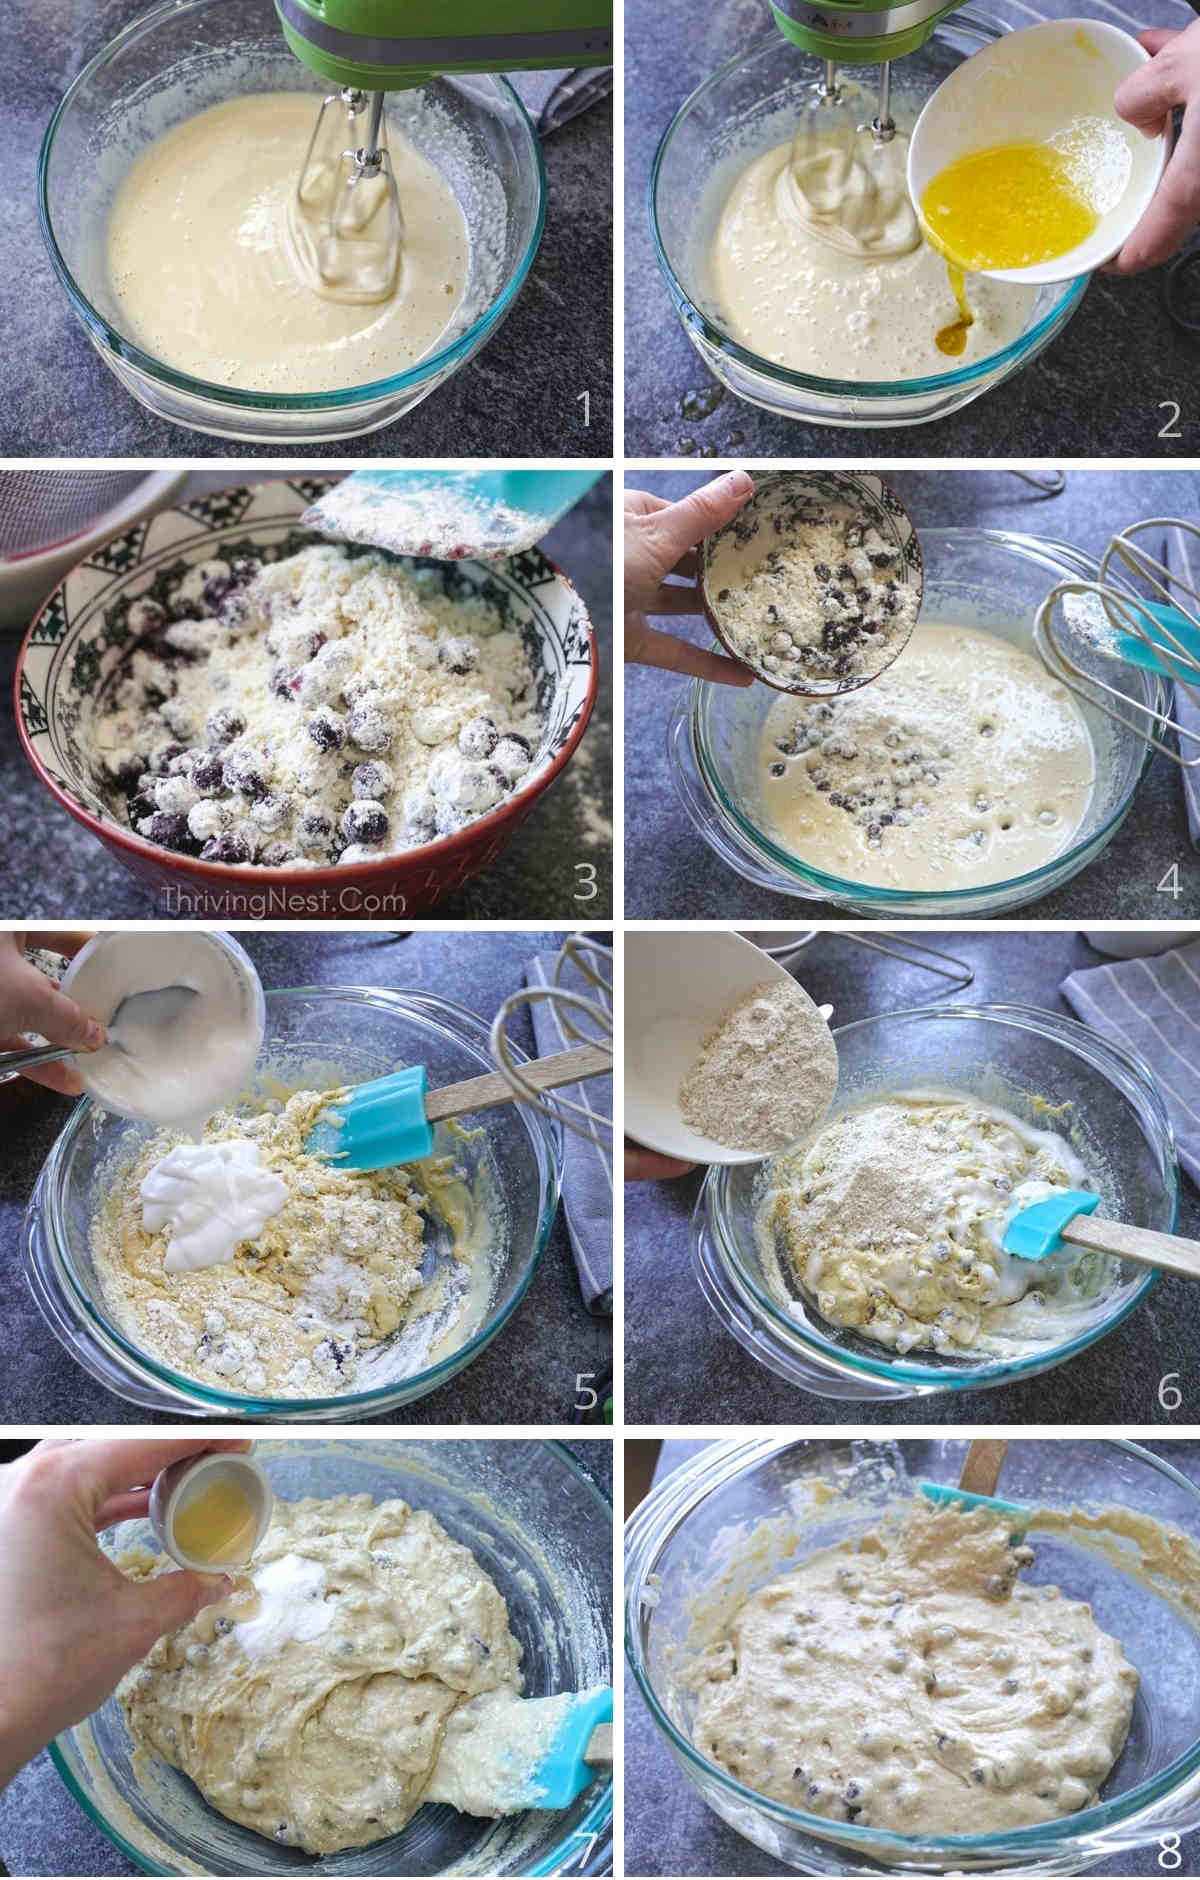 Process shots showing how to make blueberry muffins for baby step by step with pictures.